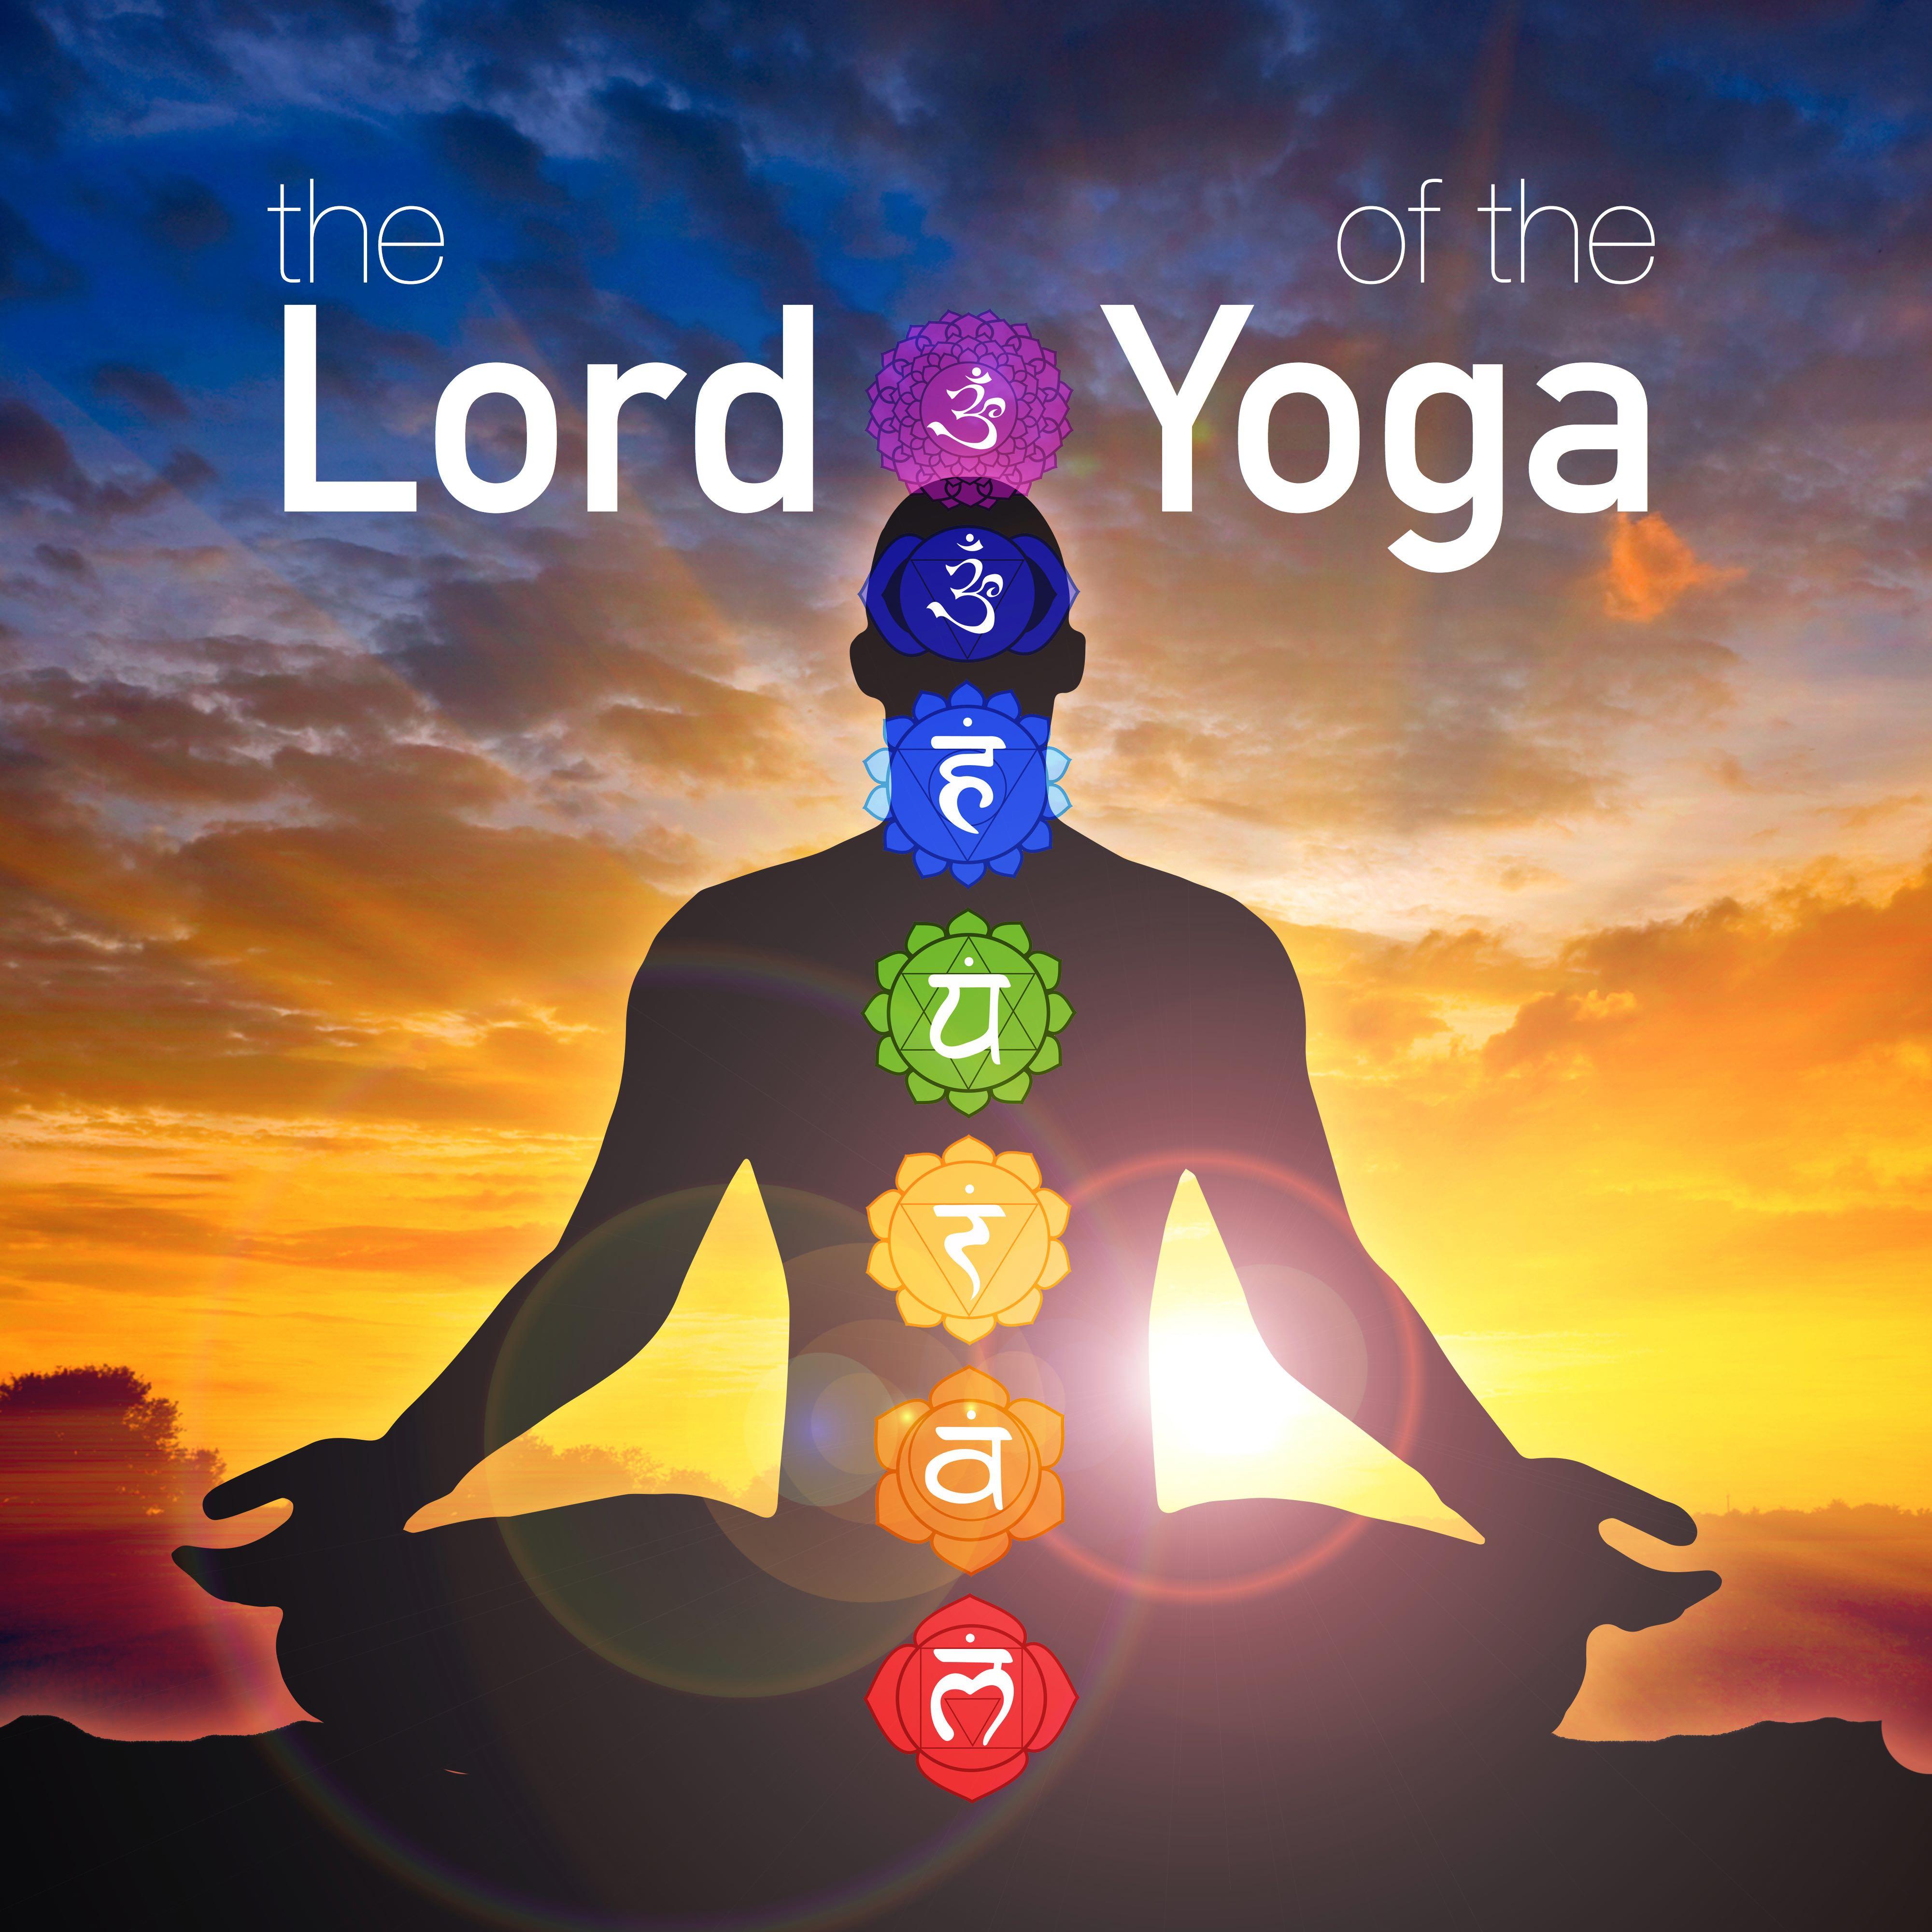 The Lord of the Yoga: Music for Creative Visualization and Mind Power